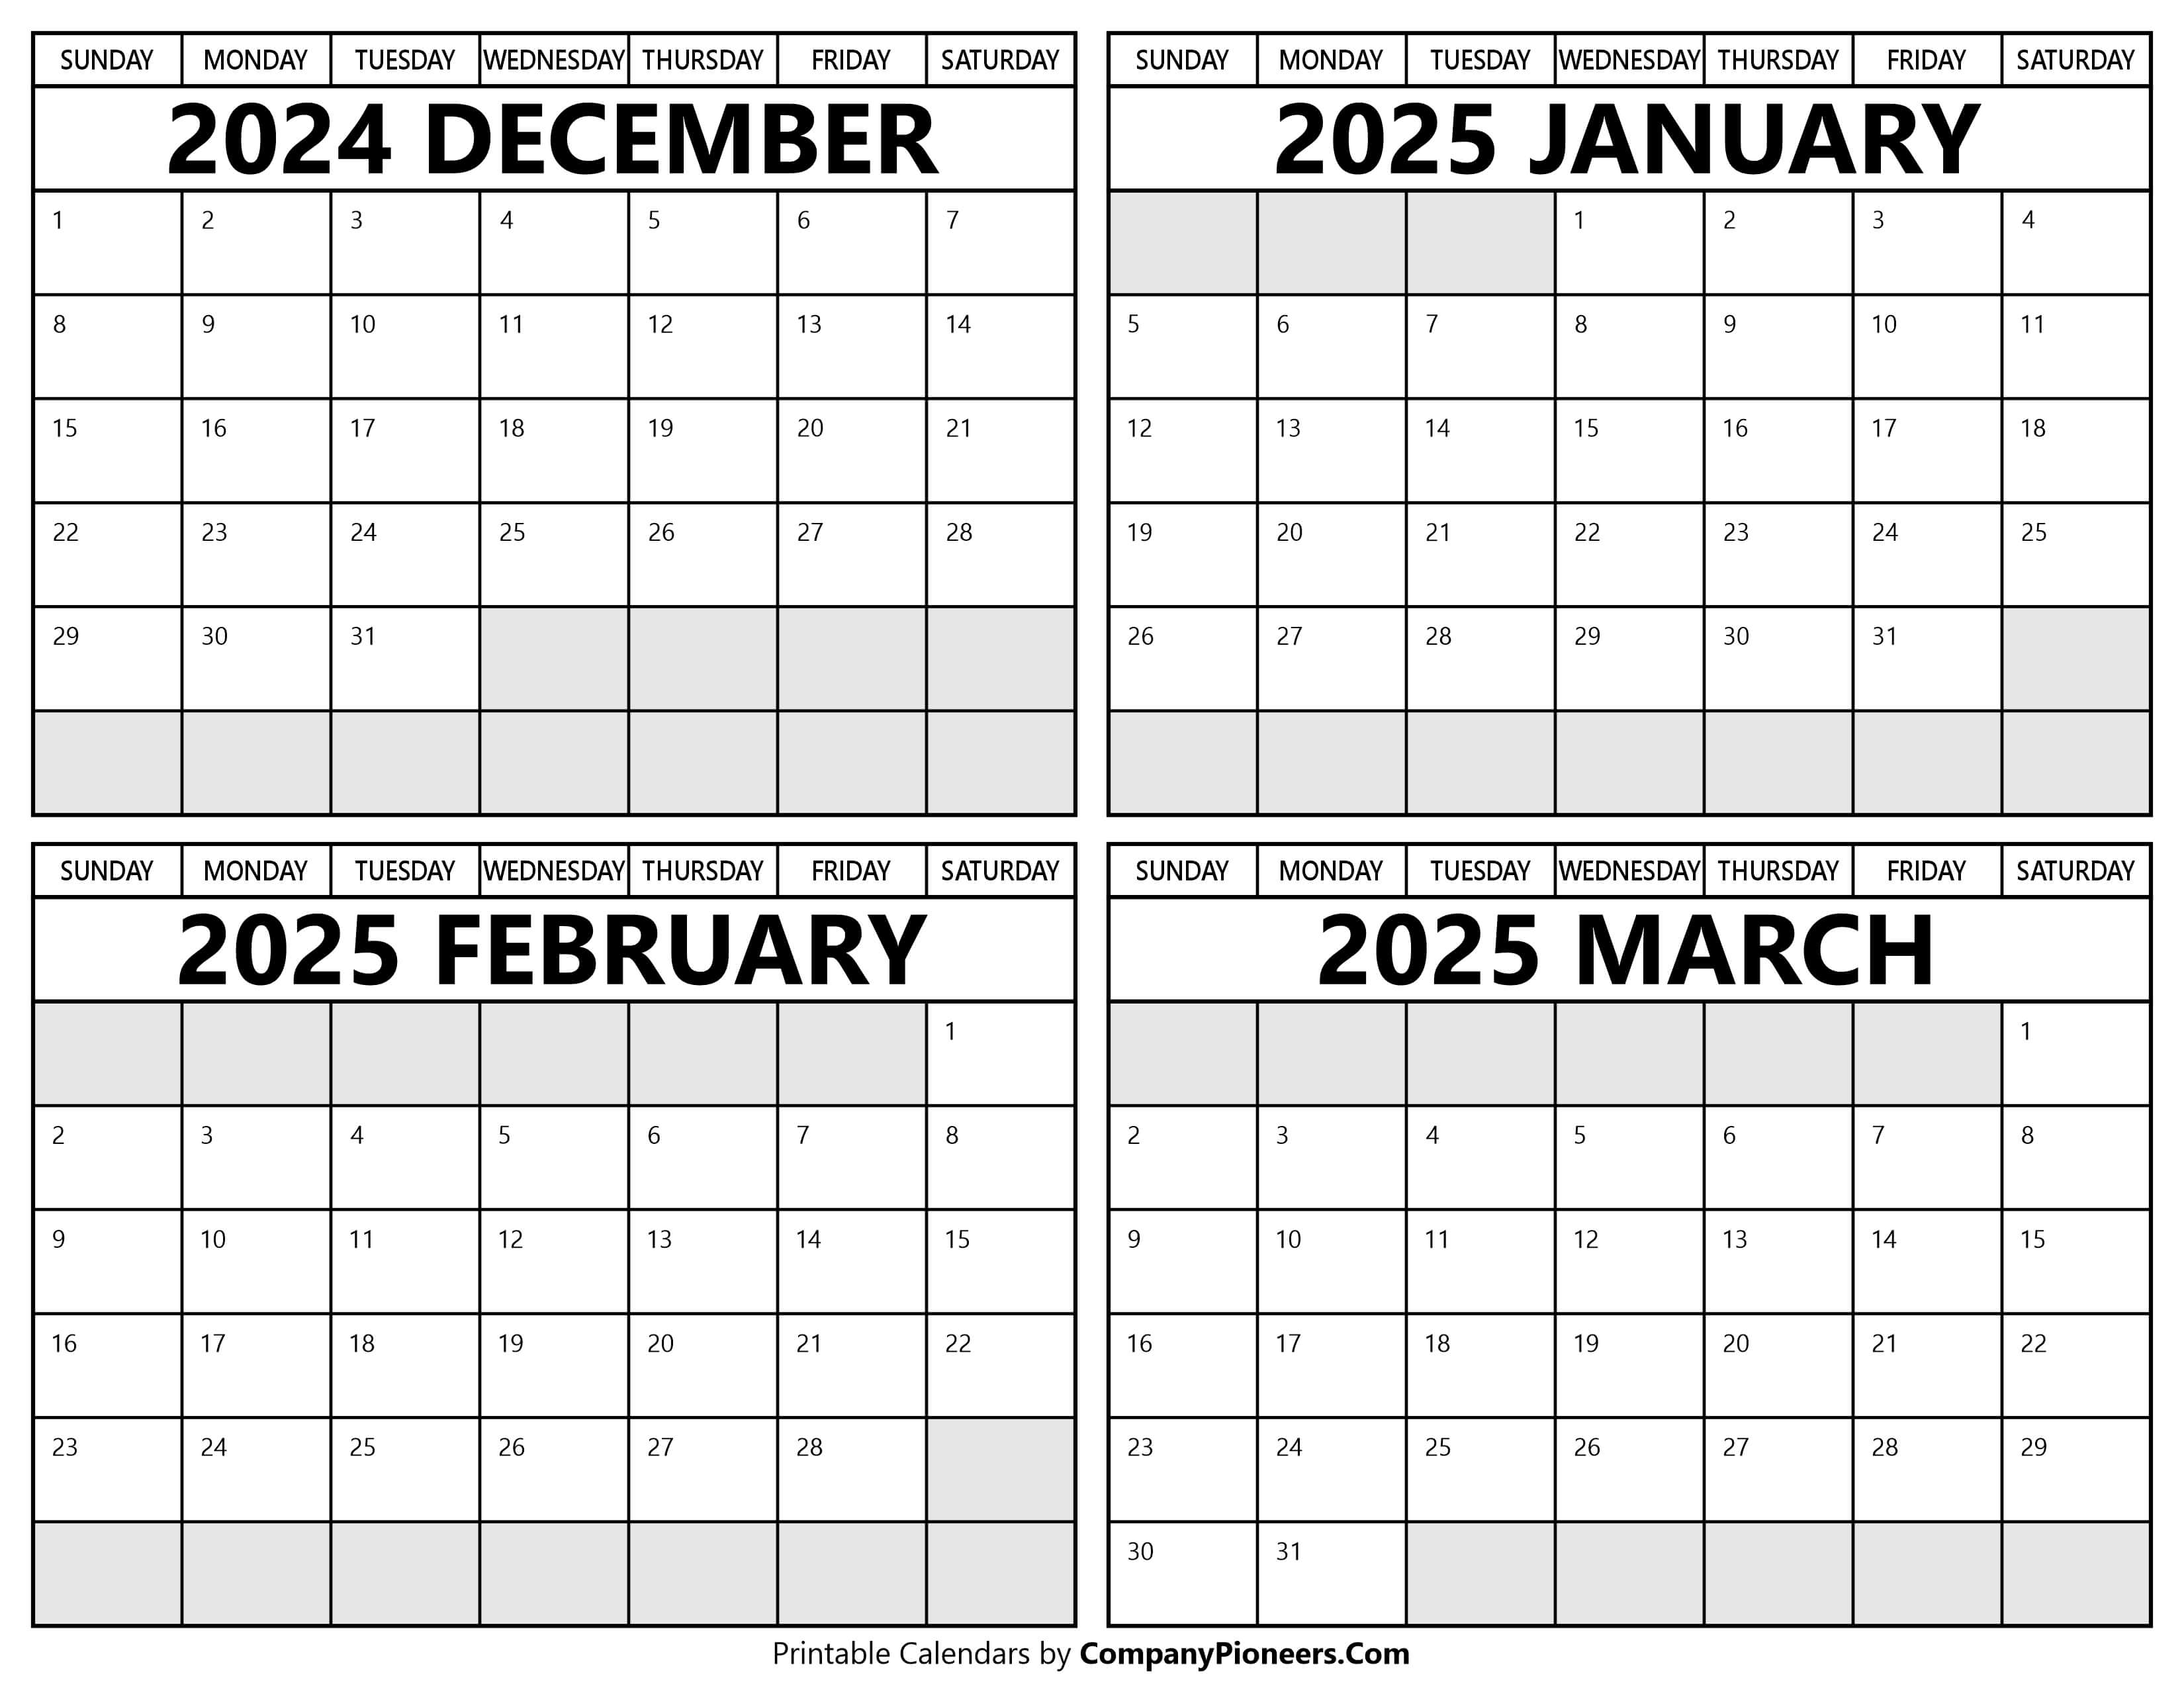 Printable December 2024 to March 2025 Calendars